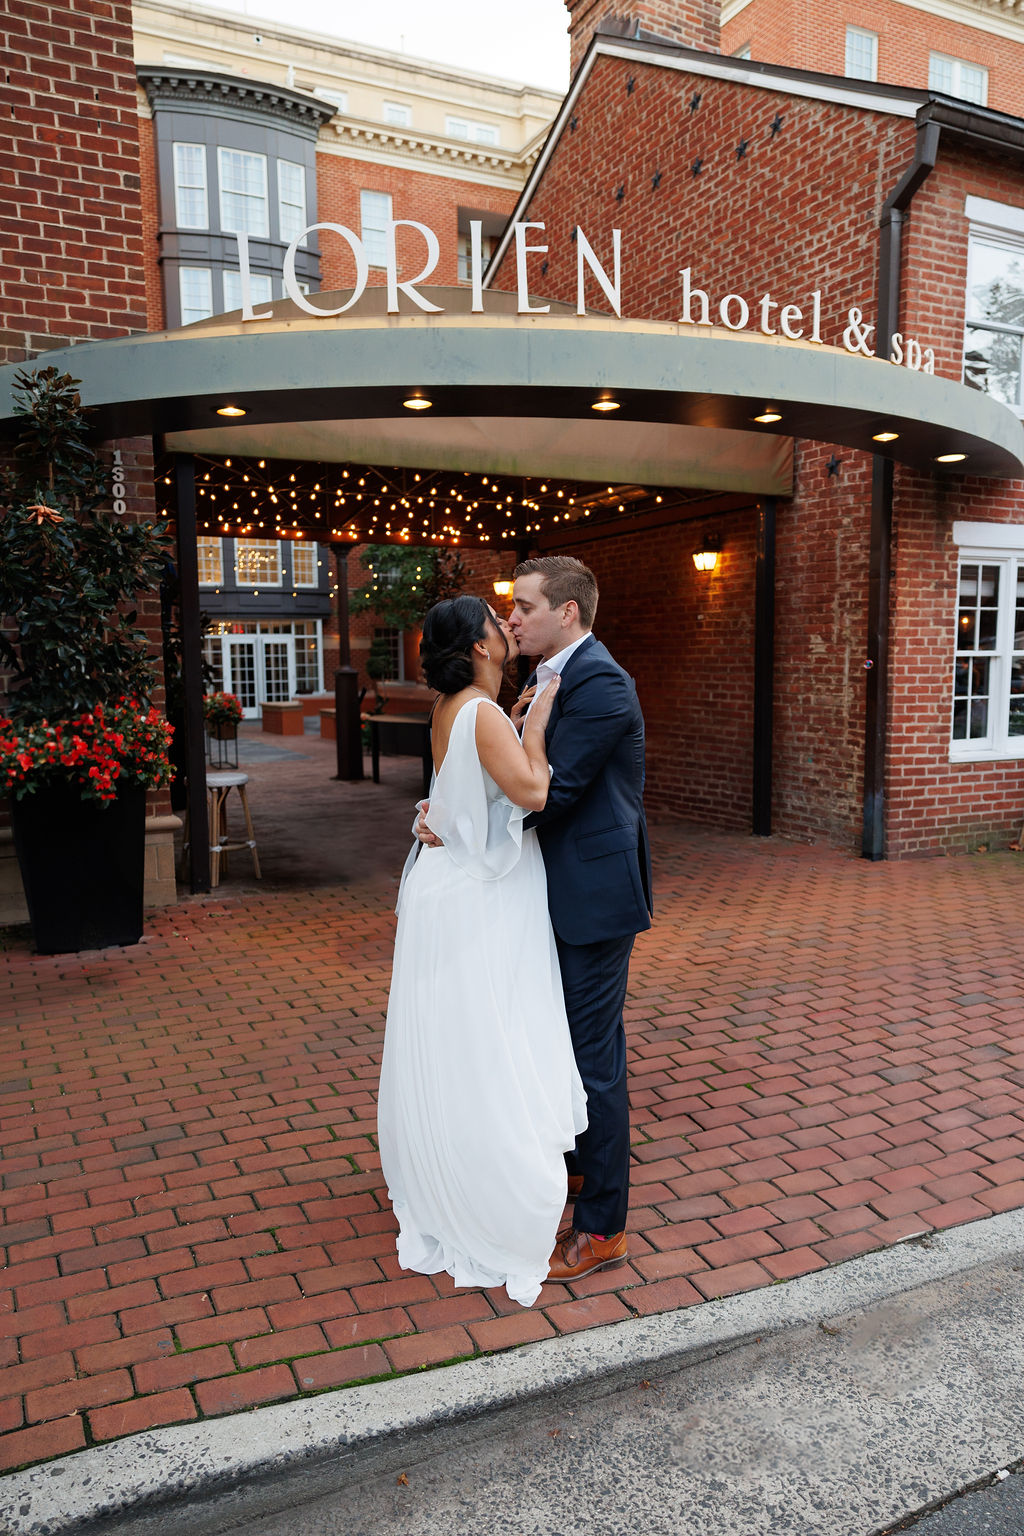 Newlyweds kiss under the front facade at their lorien hotel wedding